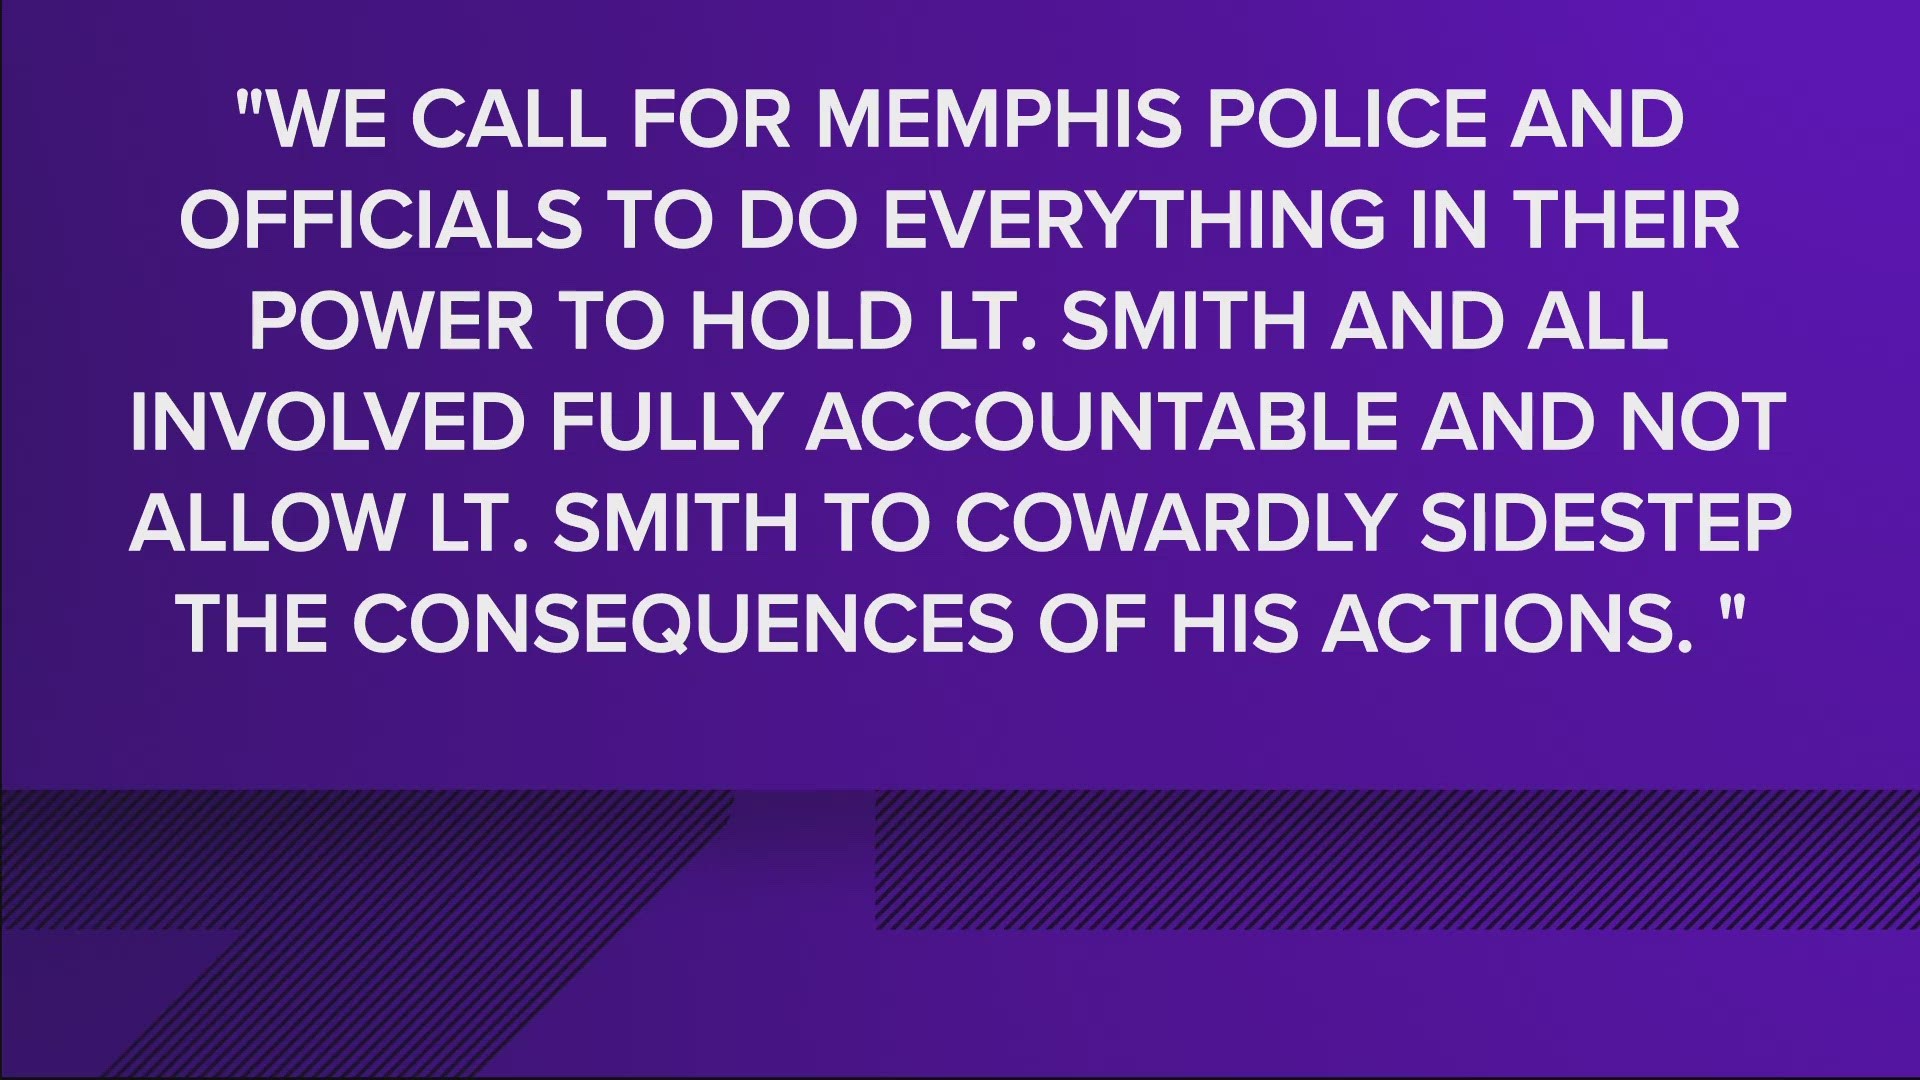 Lt. Dewayne Smith retired before a disciplinary hearing on the case. Police reports indicate that Smith failed to fully assess the scene.